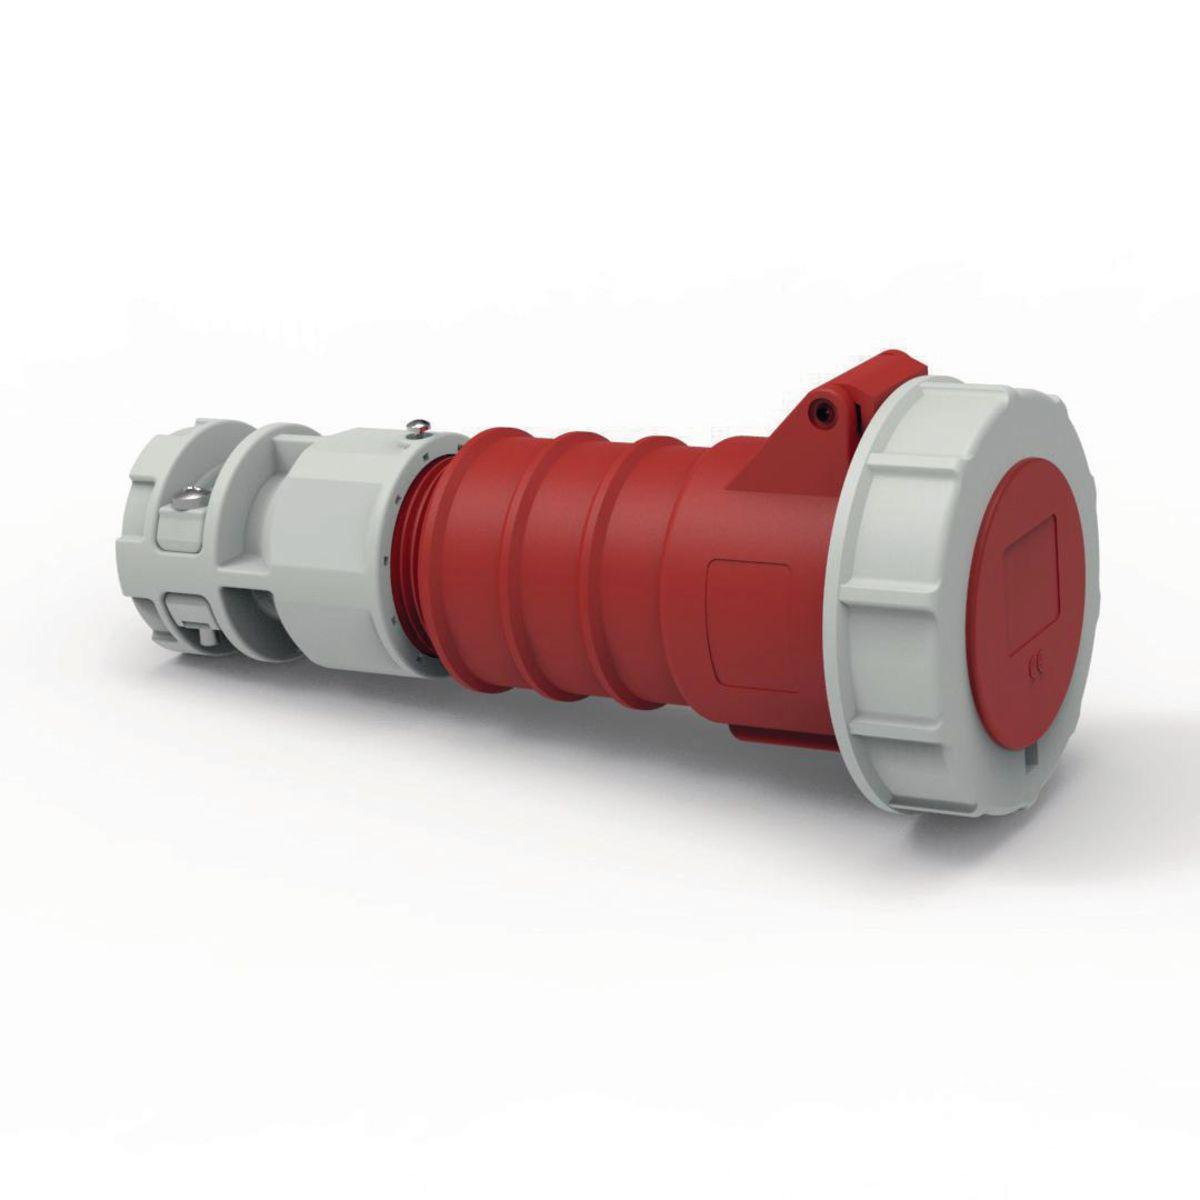 Hubbell C560C7WA Heavy Duty Products, IEC Pin and Sleeve Devices, Hubbell-PRO, Female, Connector Body, 60 A  277/480 VAC, 4-POLE 5-WIRE, Red, Watertight  ; IP67 environmental ratings ; Impact and corrosion resistant insulated non-metallic housing ; Sequential contact enga